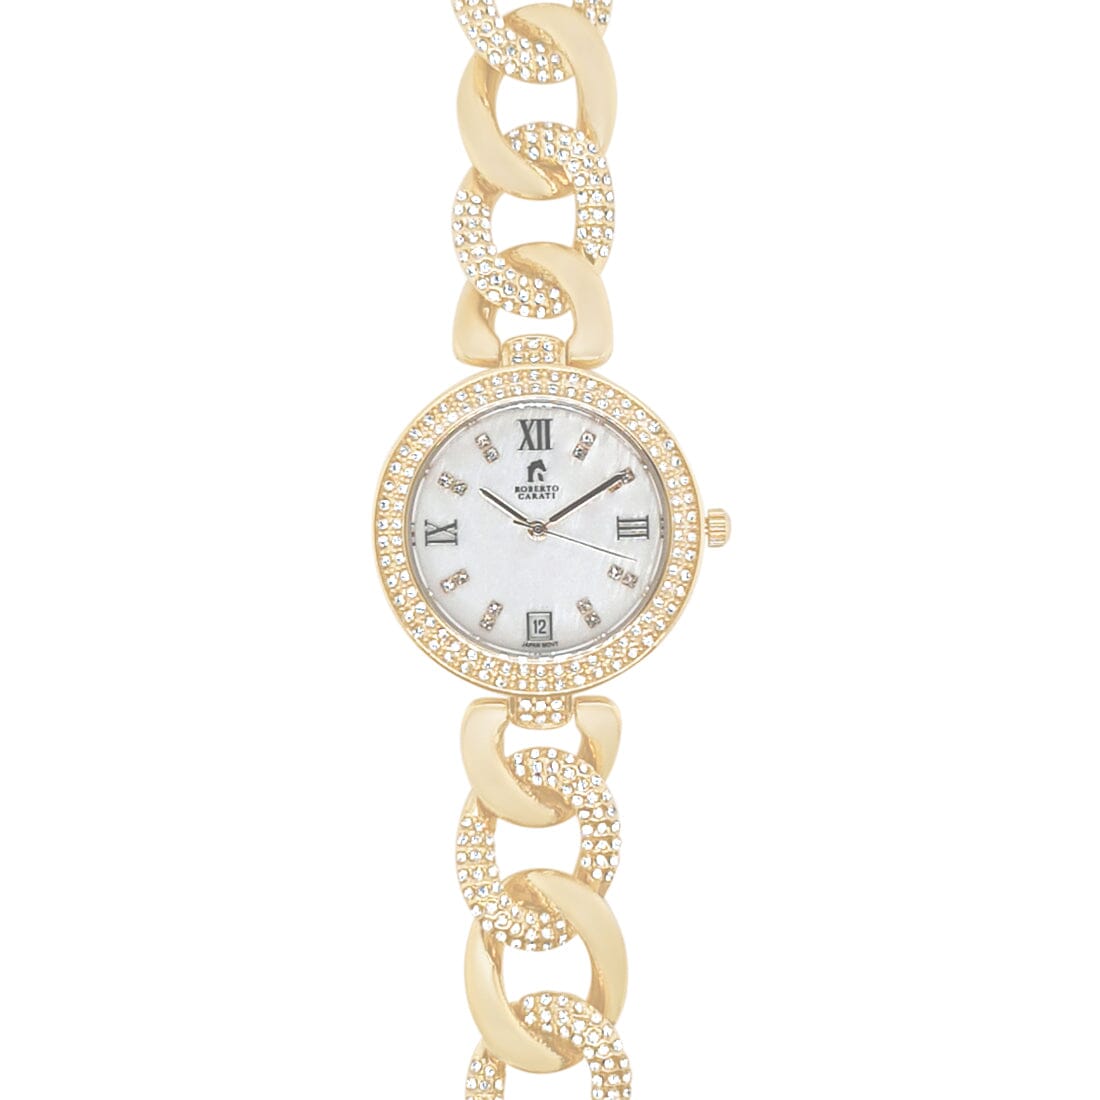 Roberto Carati Vivienne Gold Watch with Crystals M9084-V1 Watches Roberto Carati 